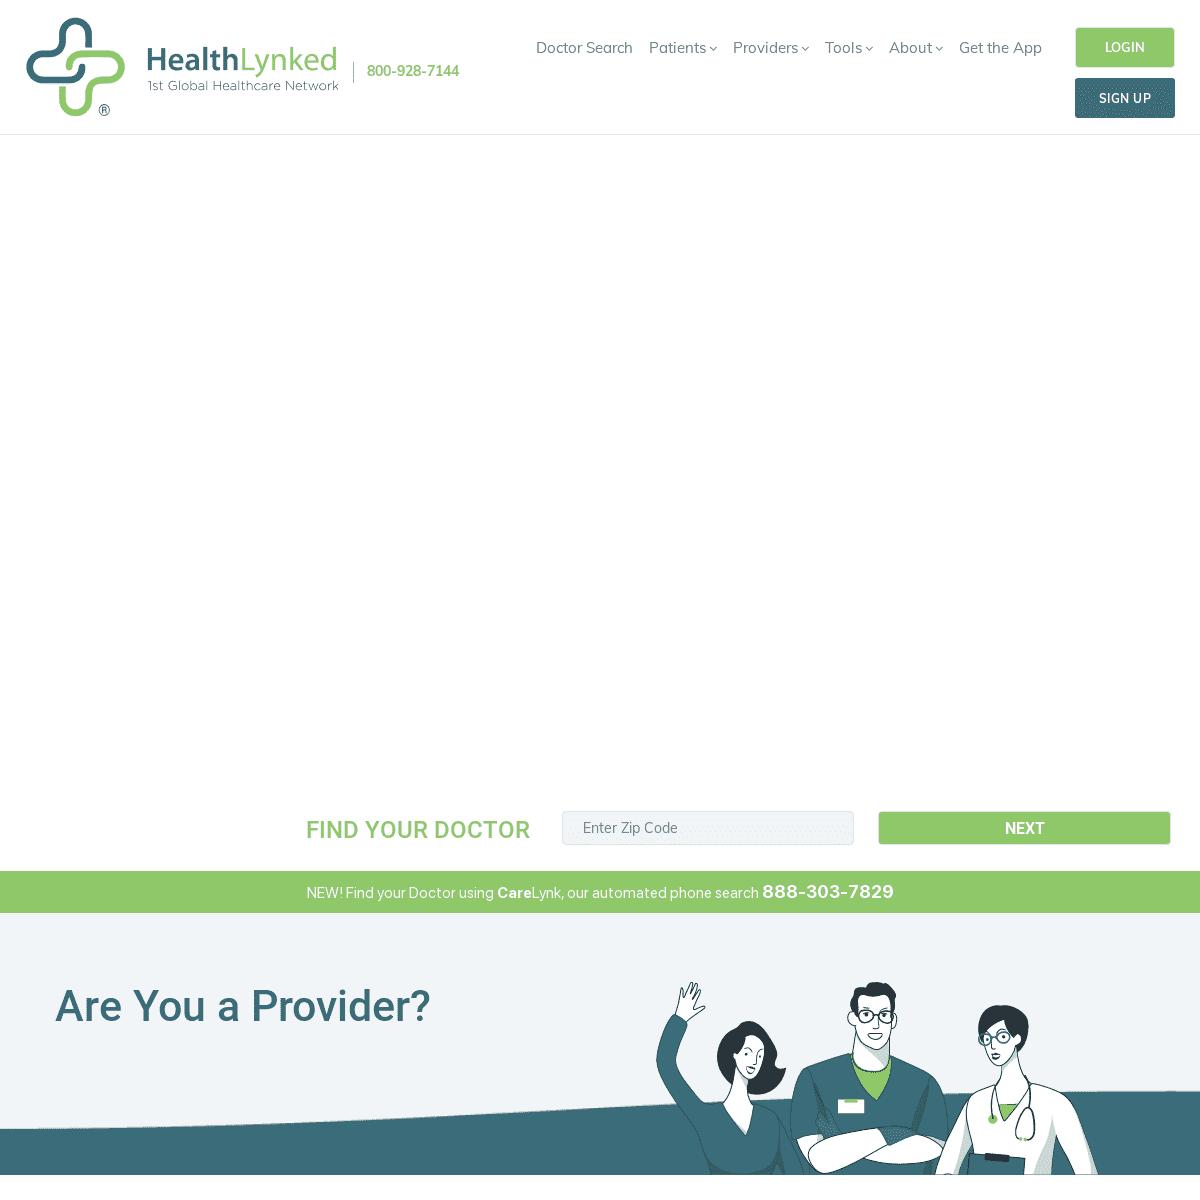 A complete backup of https://healthlynked.com